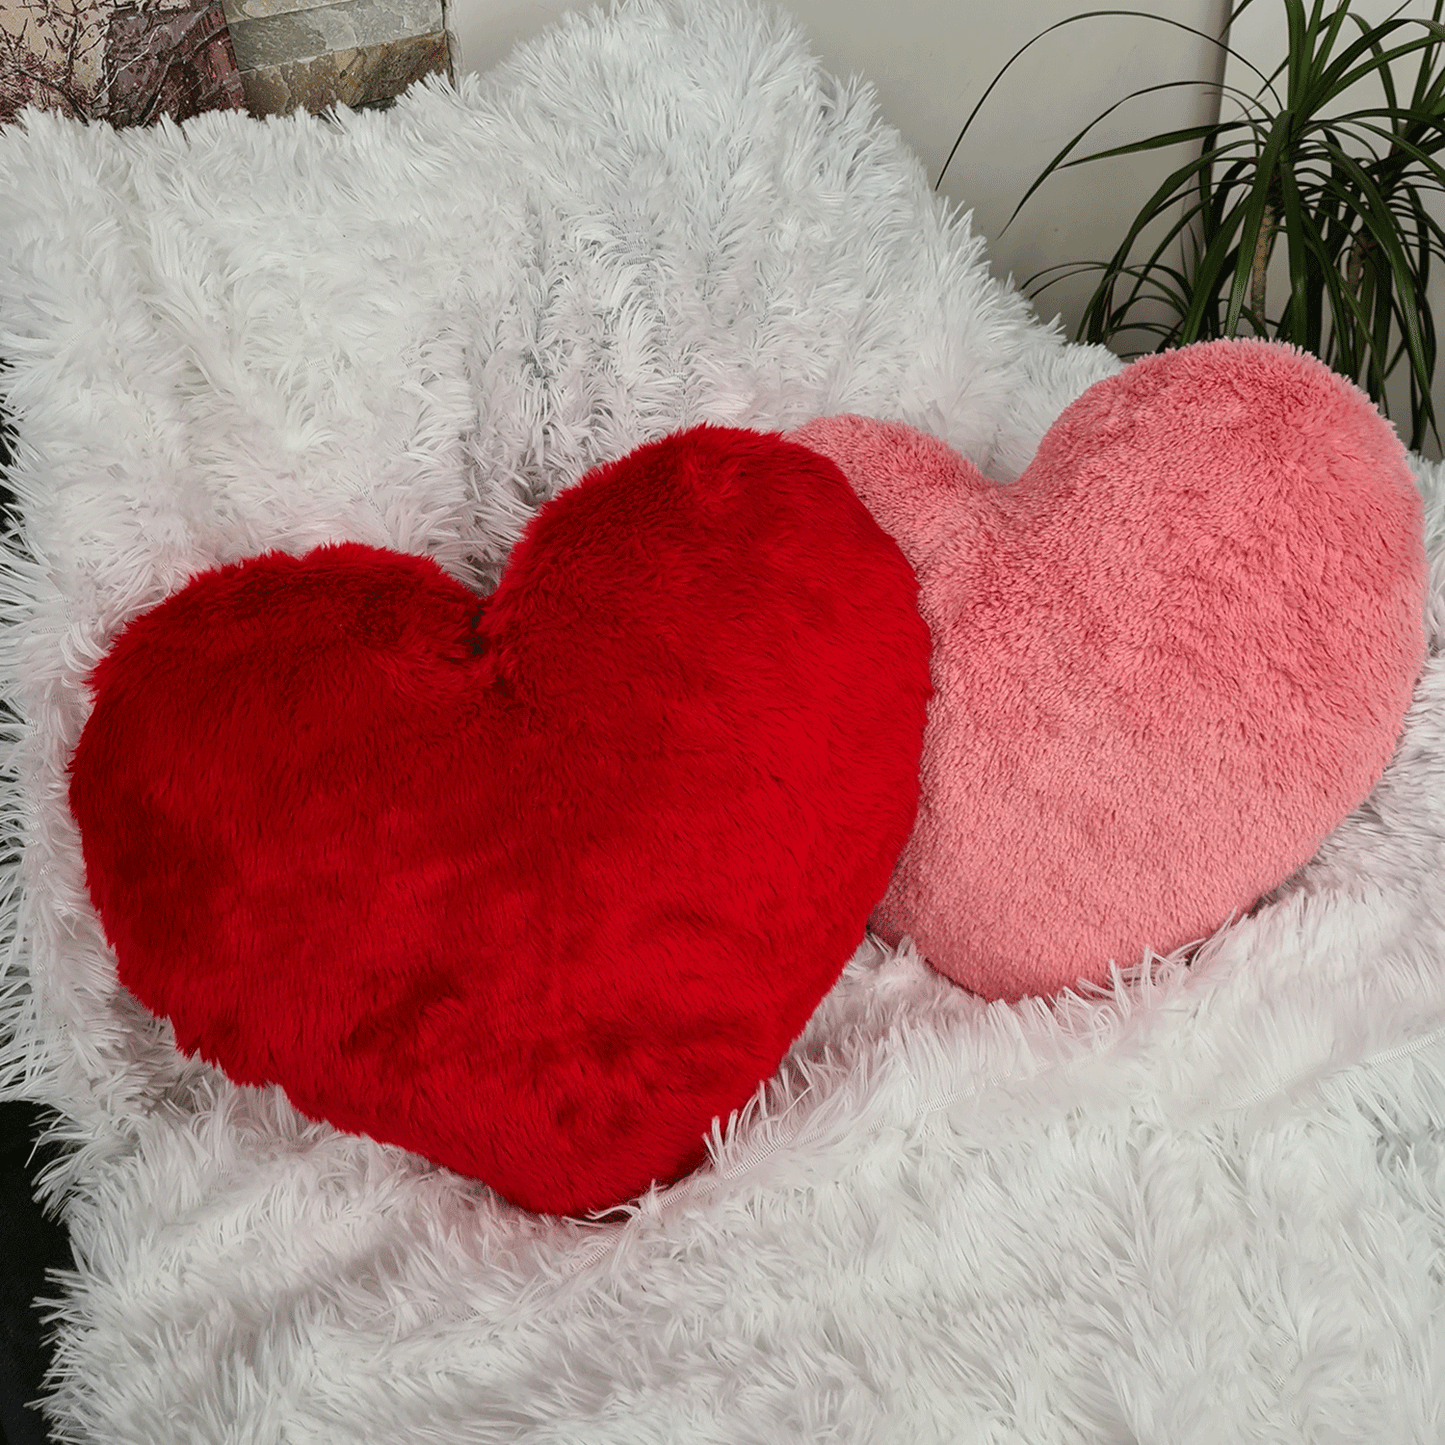 Red Plush Heart Shaped Pillow